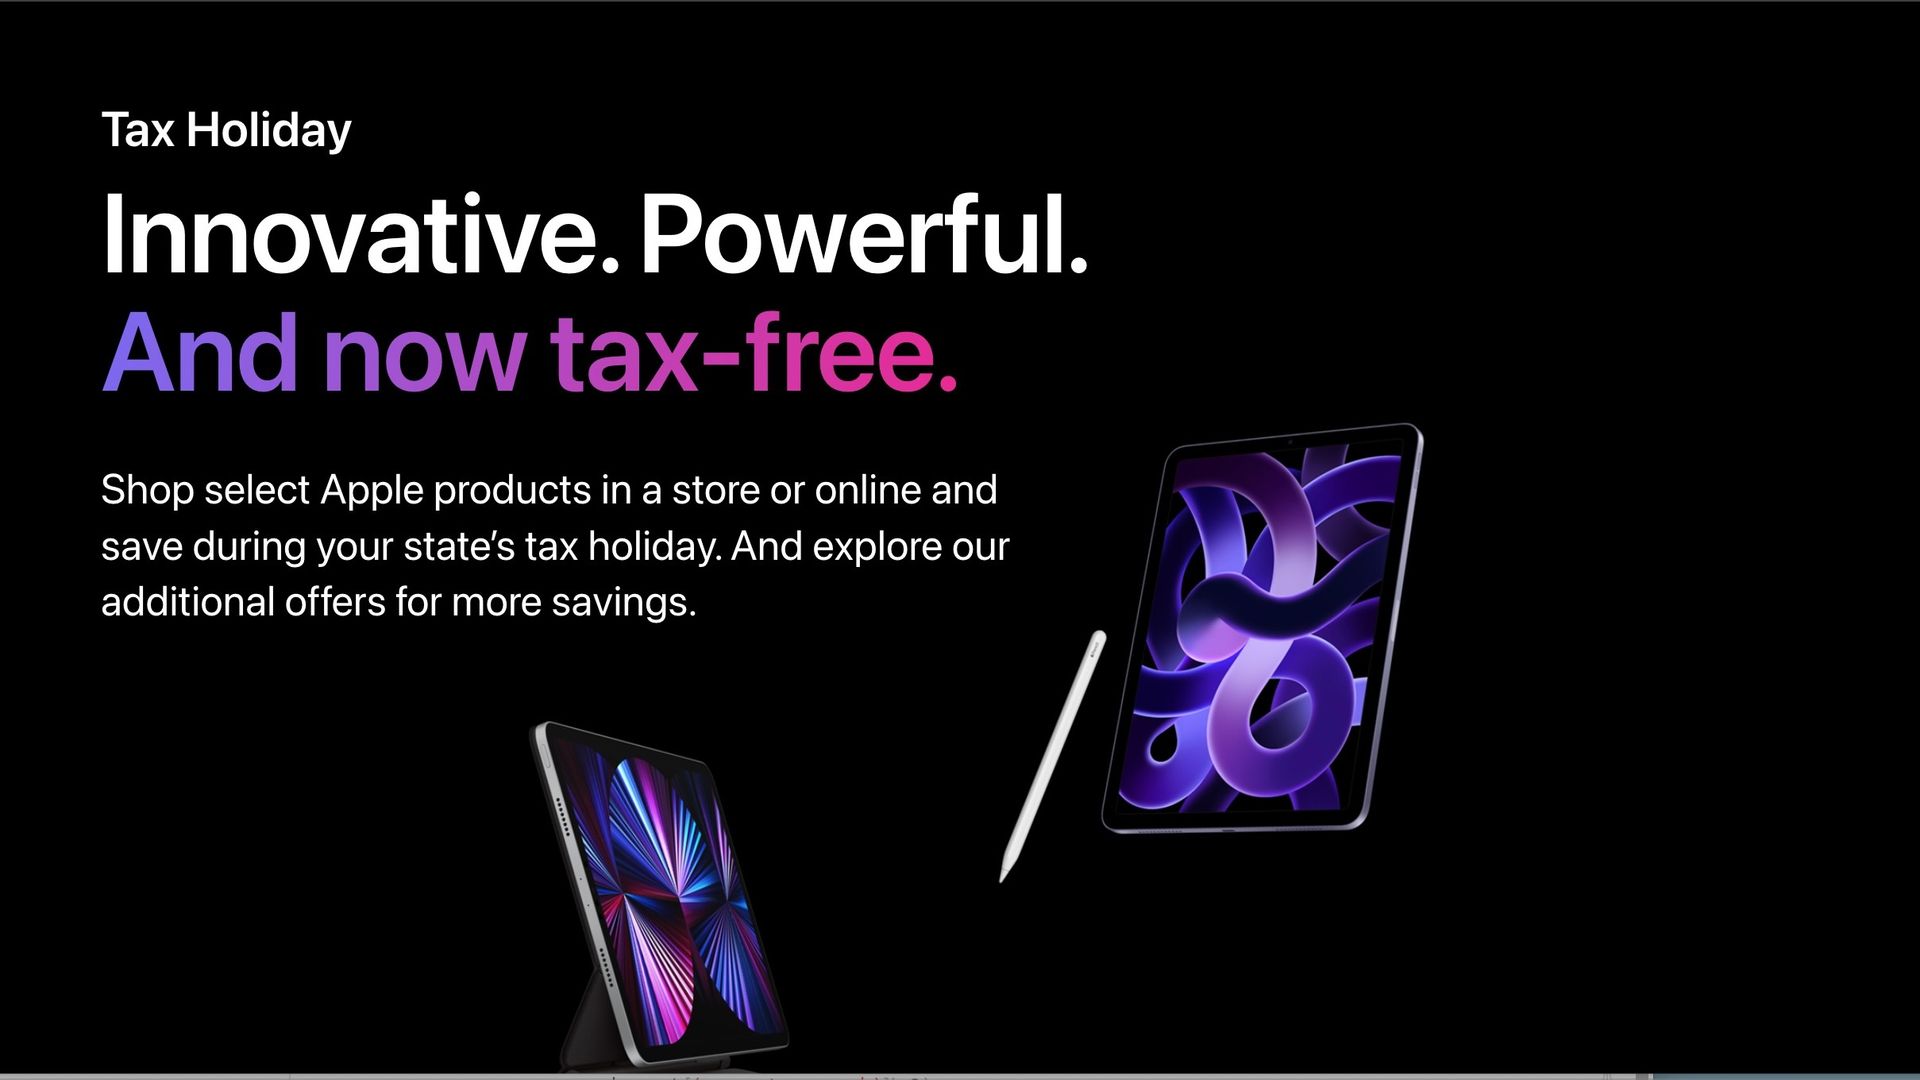 Apple taxfree shopping arrives in 9 U.S. states starting this week iMore